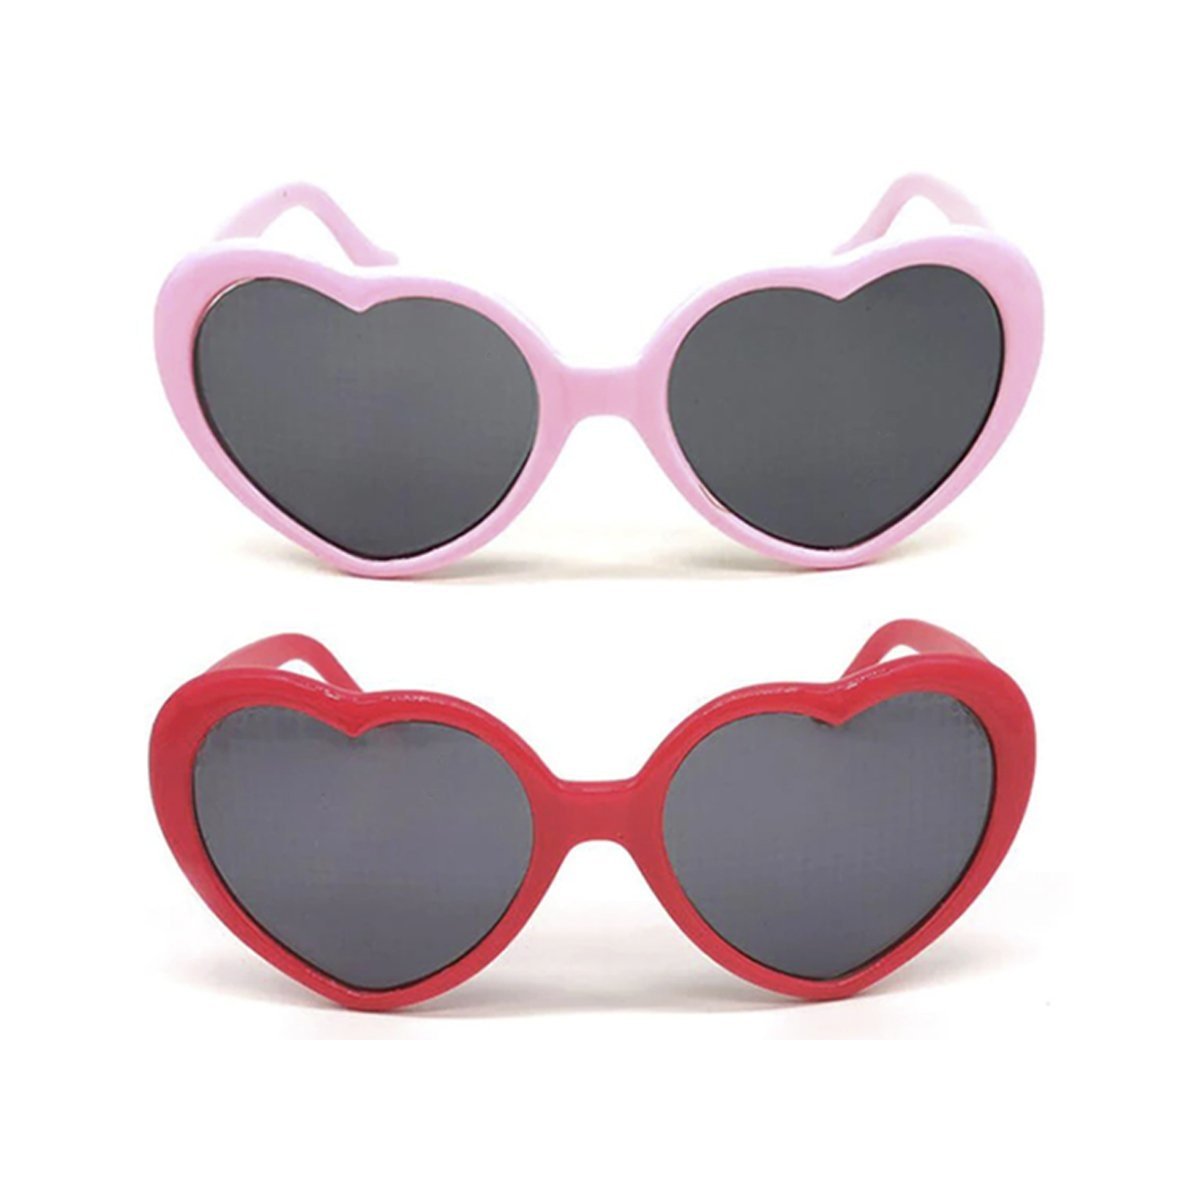 2 Pairs Quality Diffraction Glasses Love Heart Shape Hovering Effect Women's Sunglasses. - Pink and Red - - Asia Sell